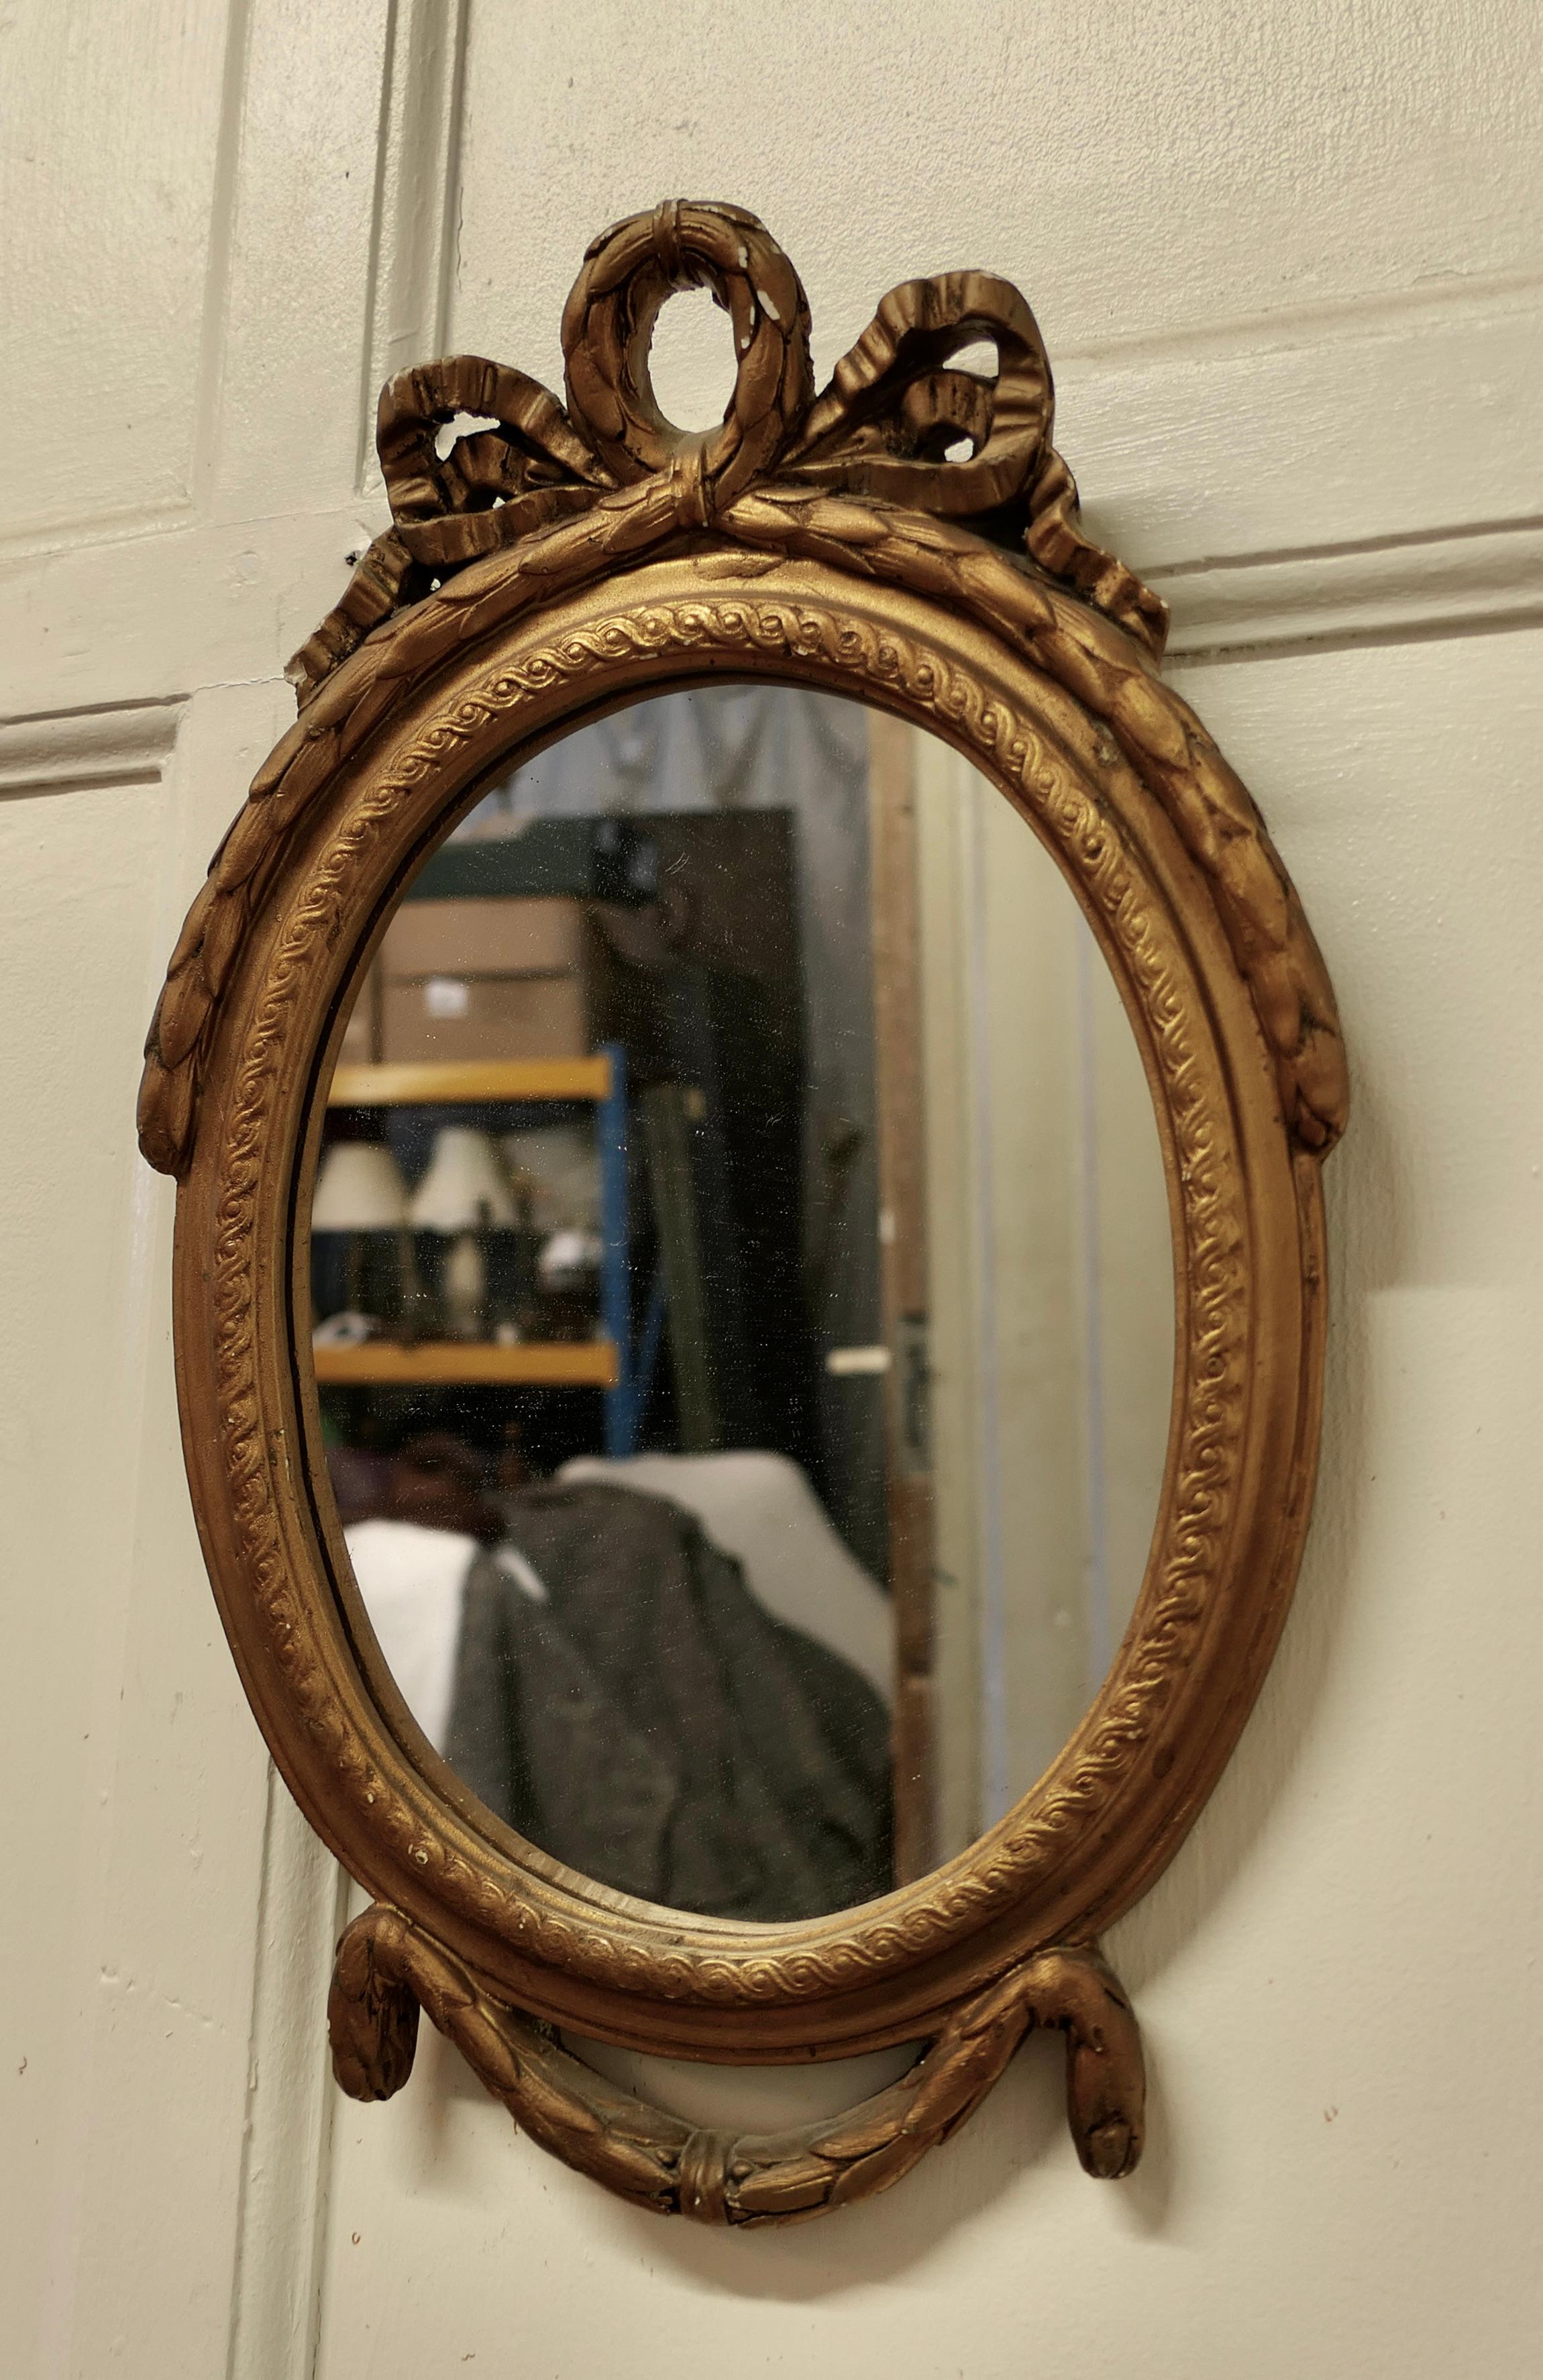 Small Rococo Oval Gilt Wall Mirror 

The Mirror has an exquisite age darkened gilt Frame in the Rococo Style, it has a oval  shape and decorated with ribbons at the top and a swag  design at the bottom 
The mirror is 12” wide and 19” tall and 2”